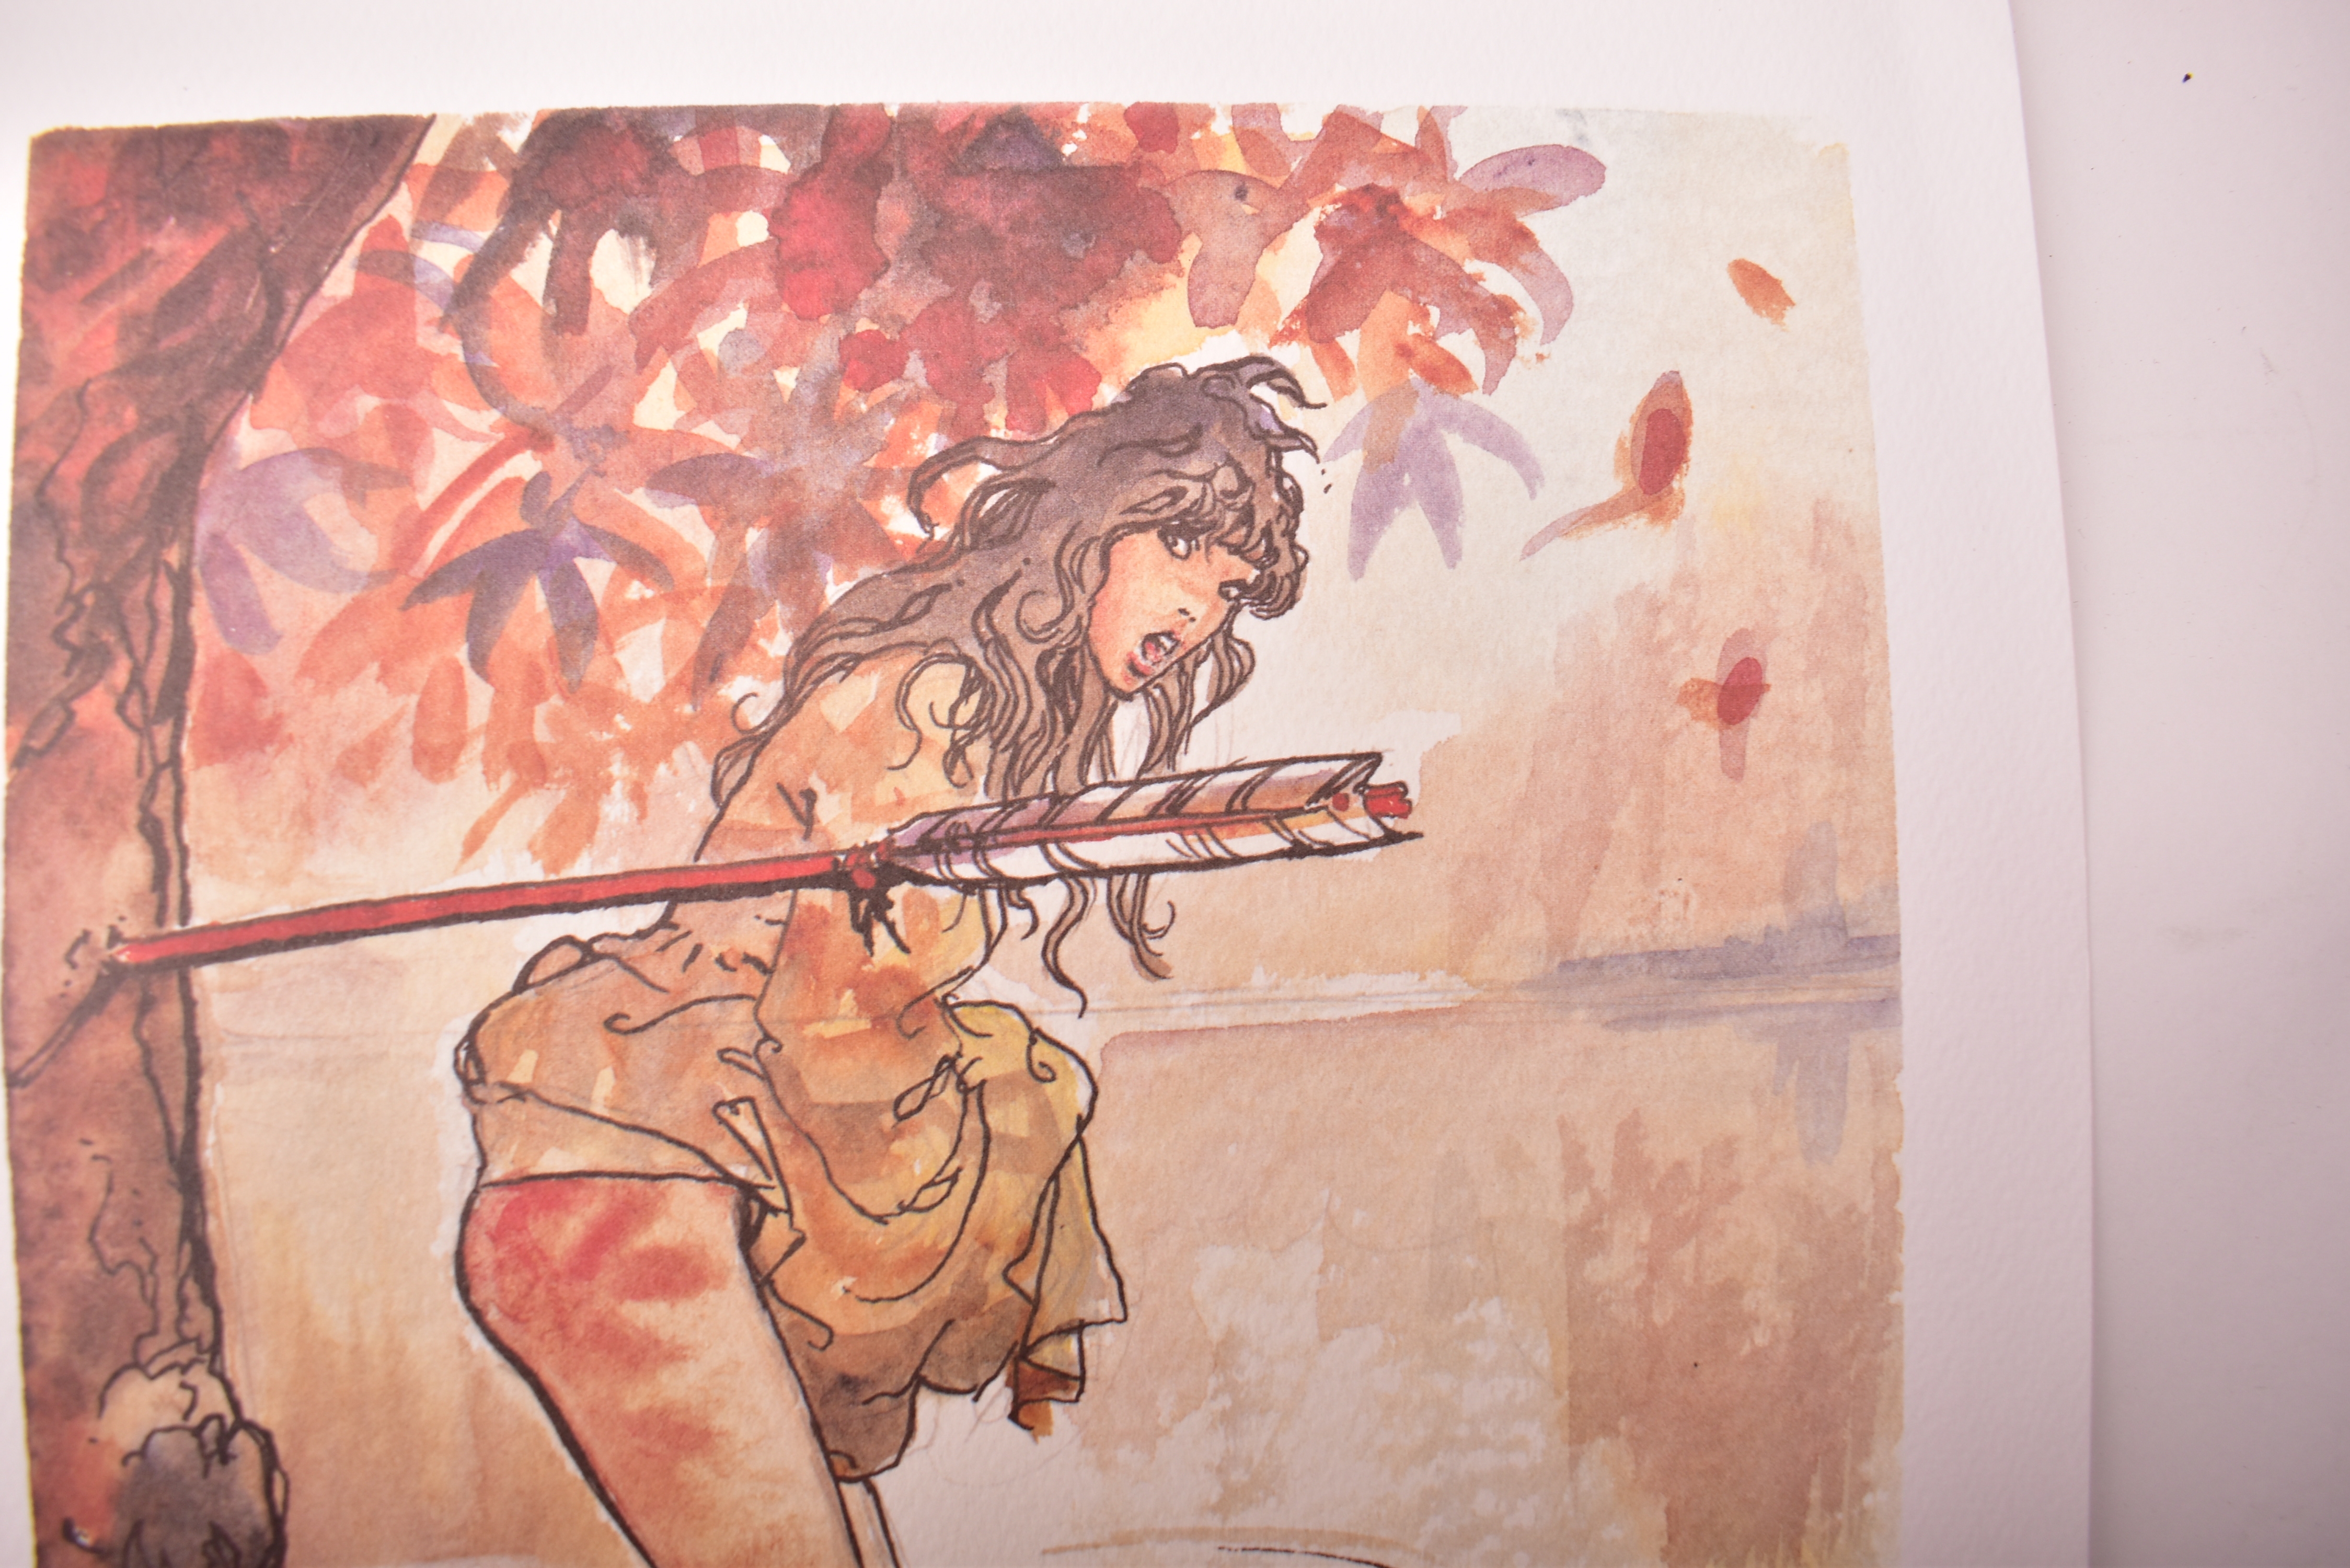 Artwork by Milo Manara, INDIAN SUMMER, Made of Colourprint on paper